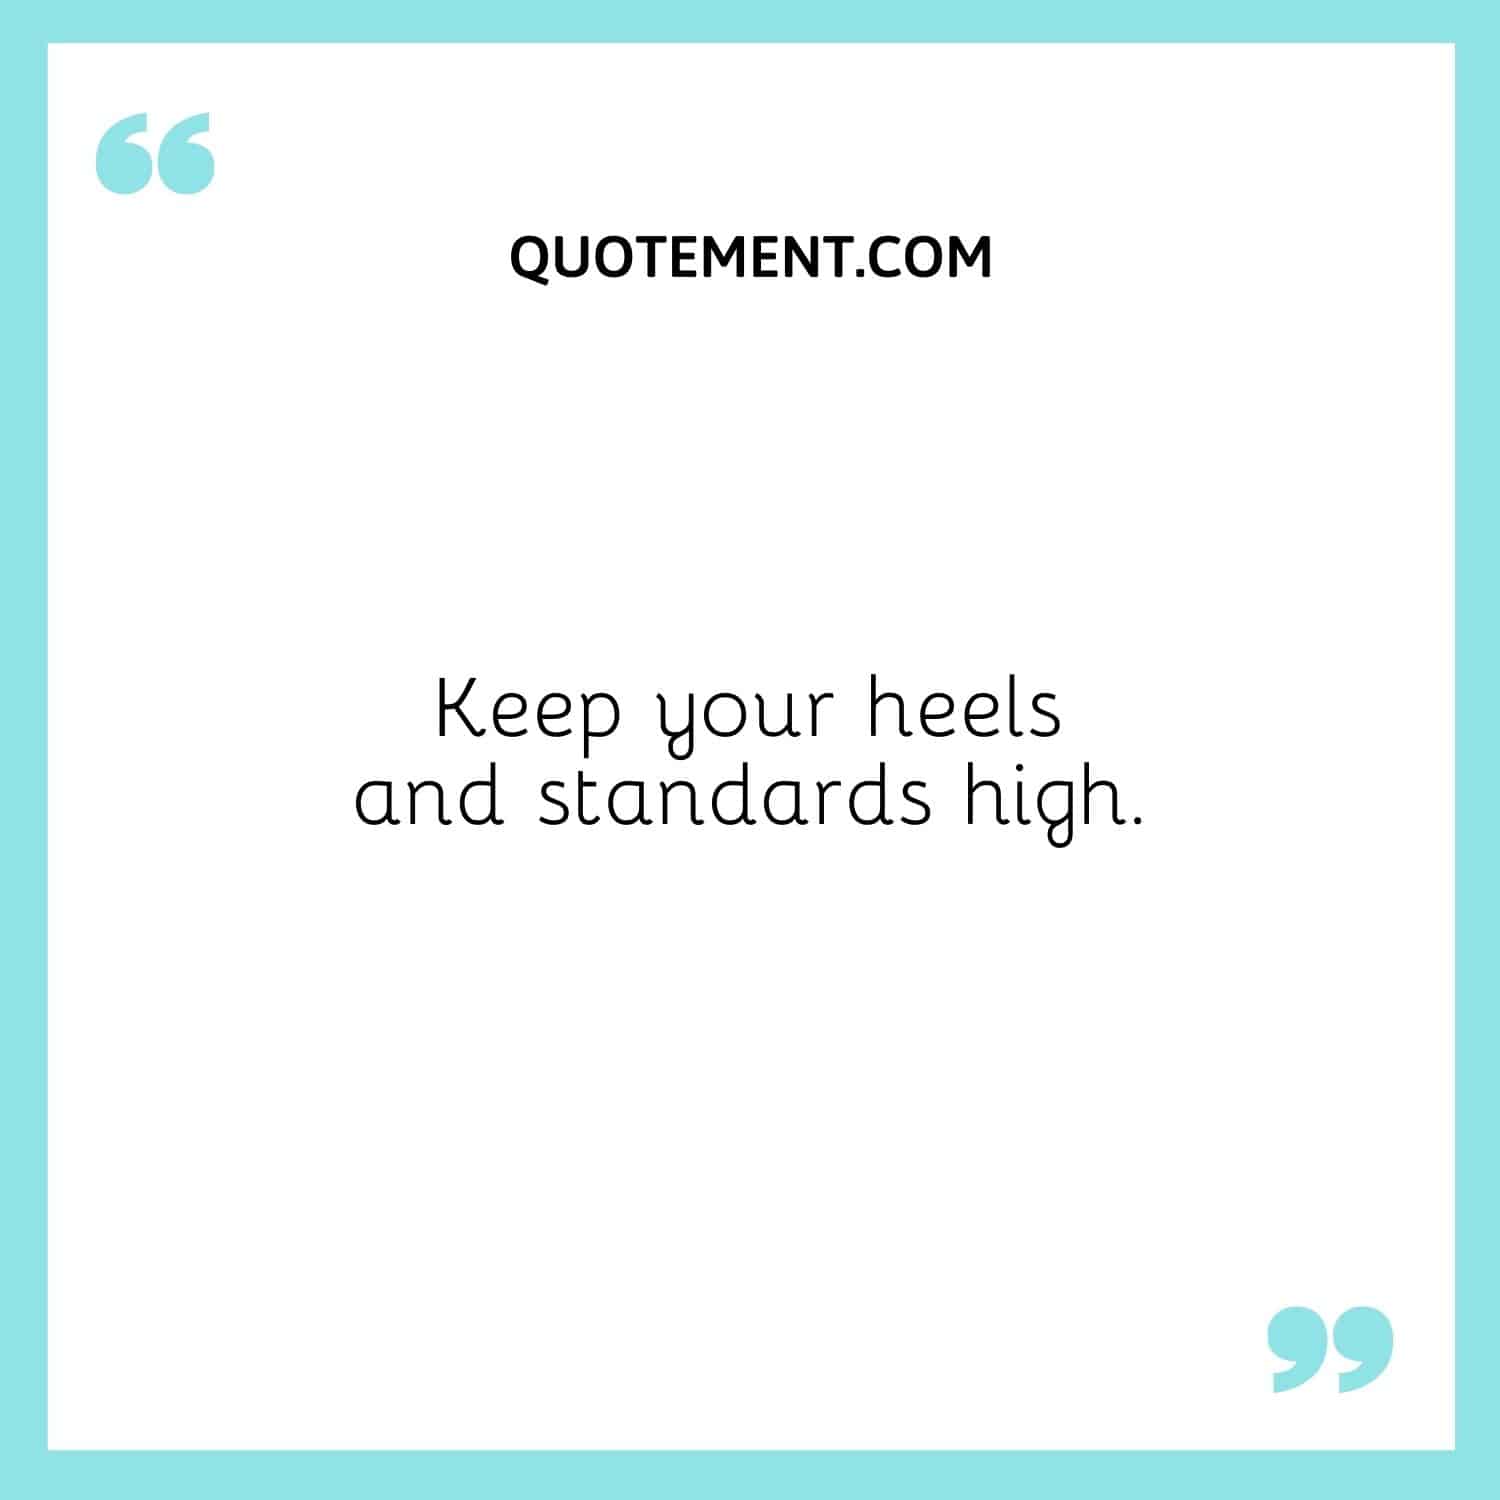 Keep your heels and standards high.